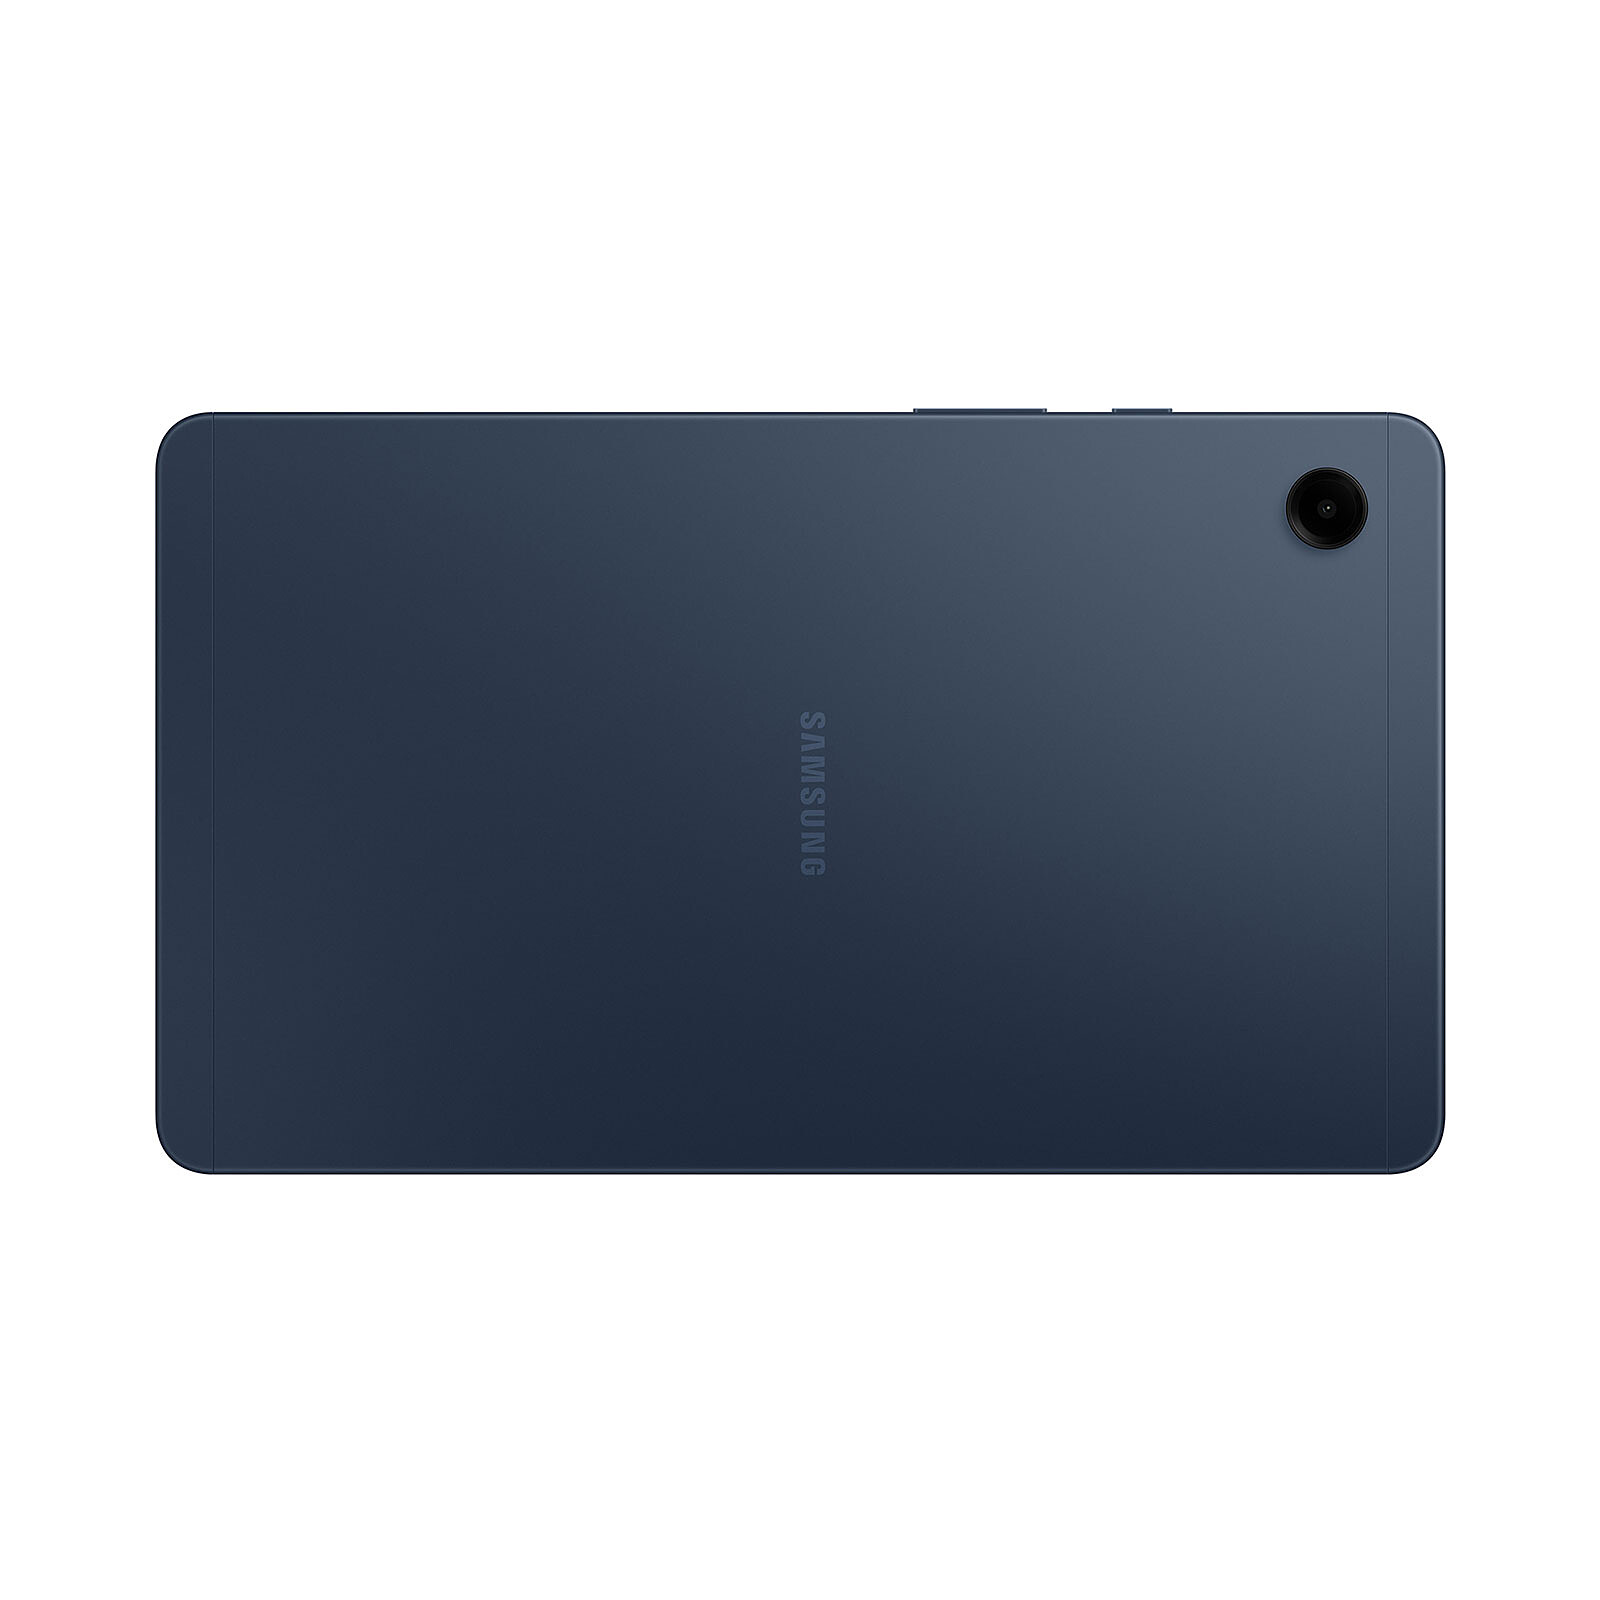 Samsung Galaxy Tab A8 10.5 32 Go Anthracite - Tablette tactile - Garantie  3 ans LDLC